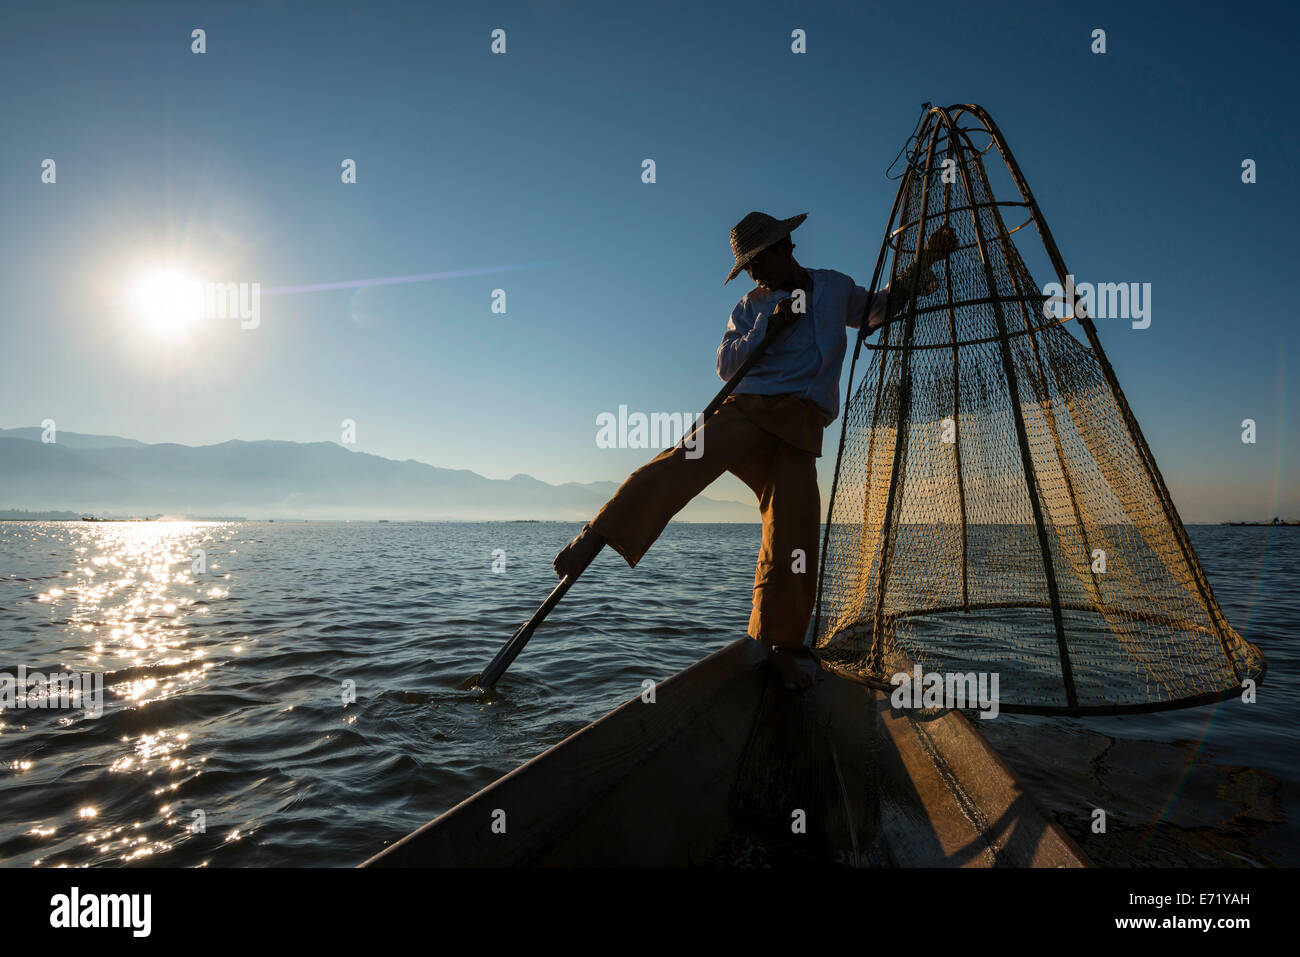 Fisherman in the morning light, leg rower with a traditional basket on the canoe, at sunrise, Inle Lake, Shan State, Myanmar Stock Photo